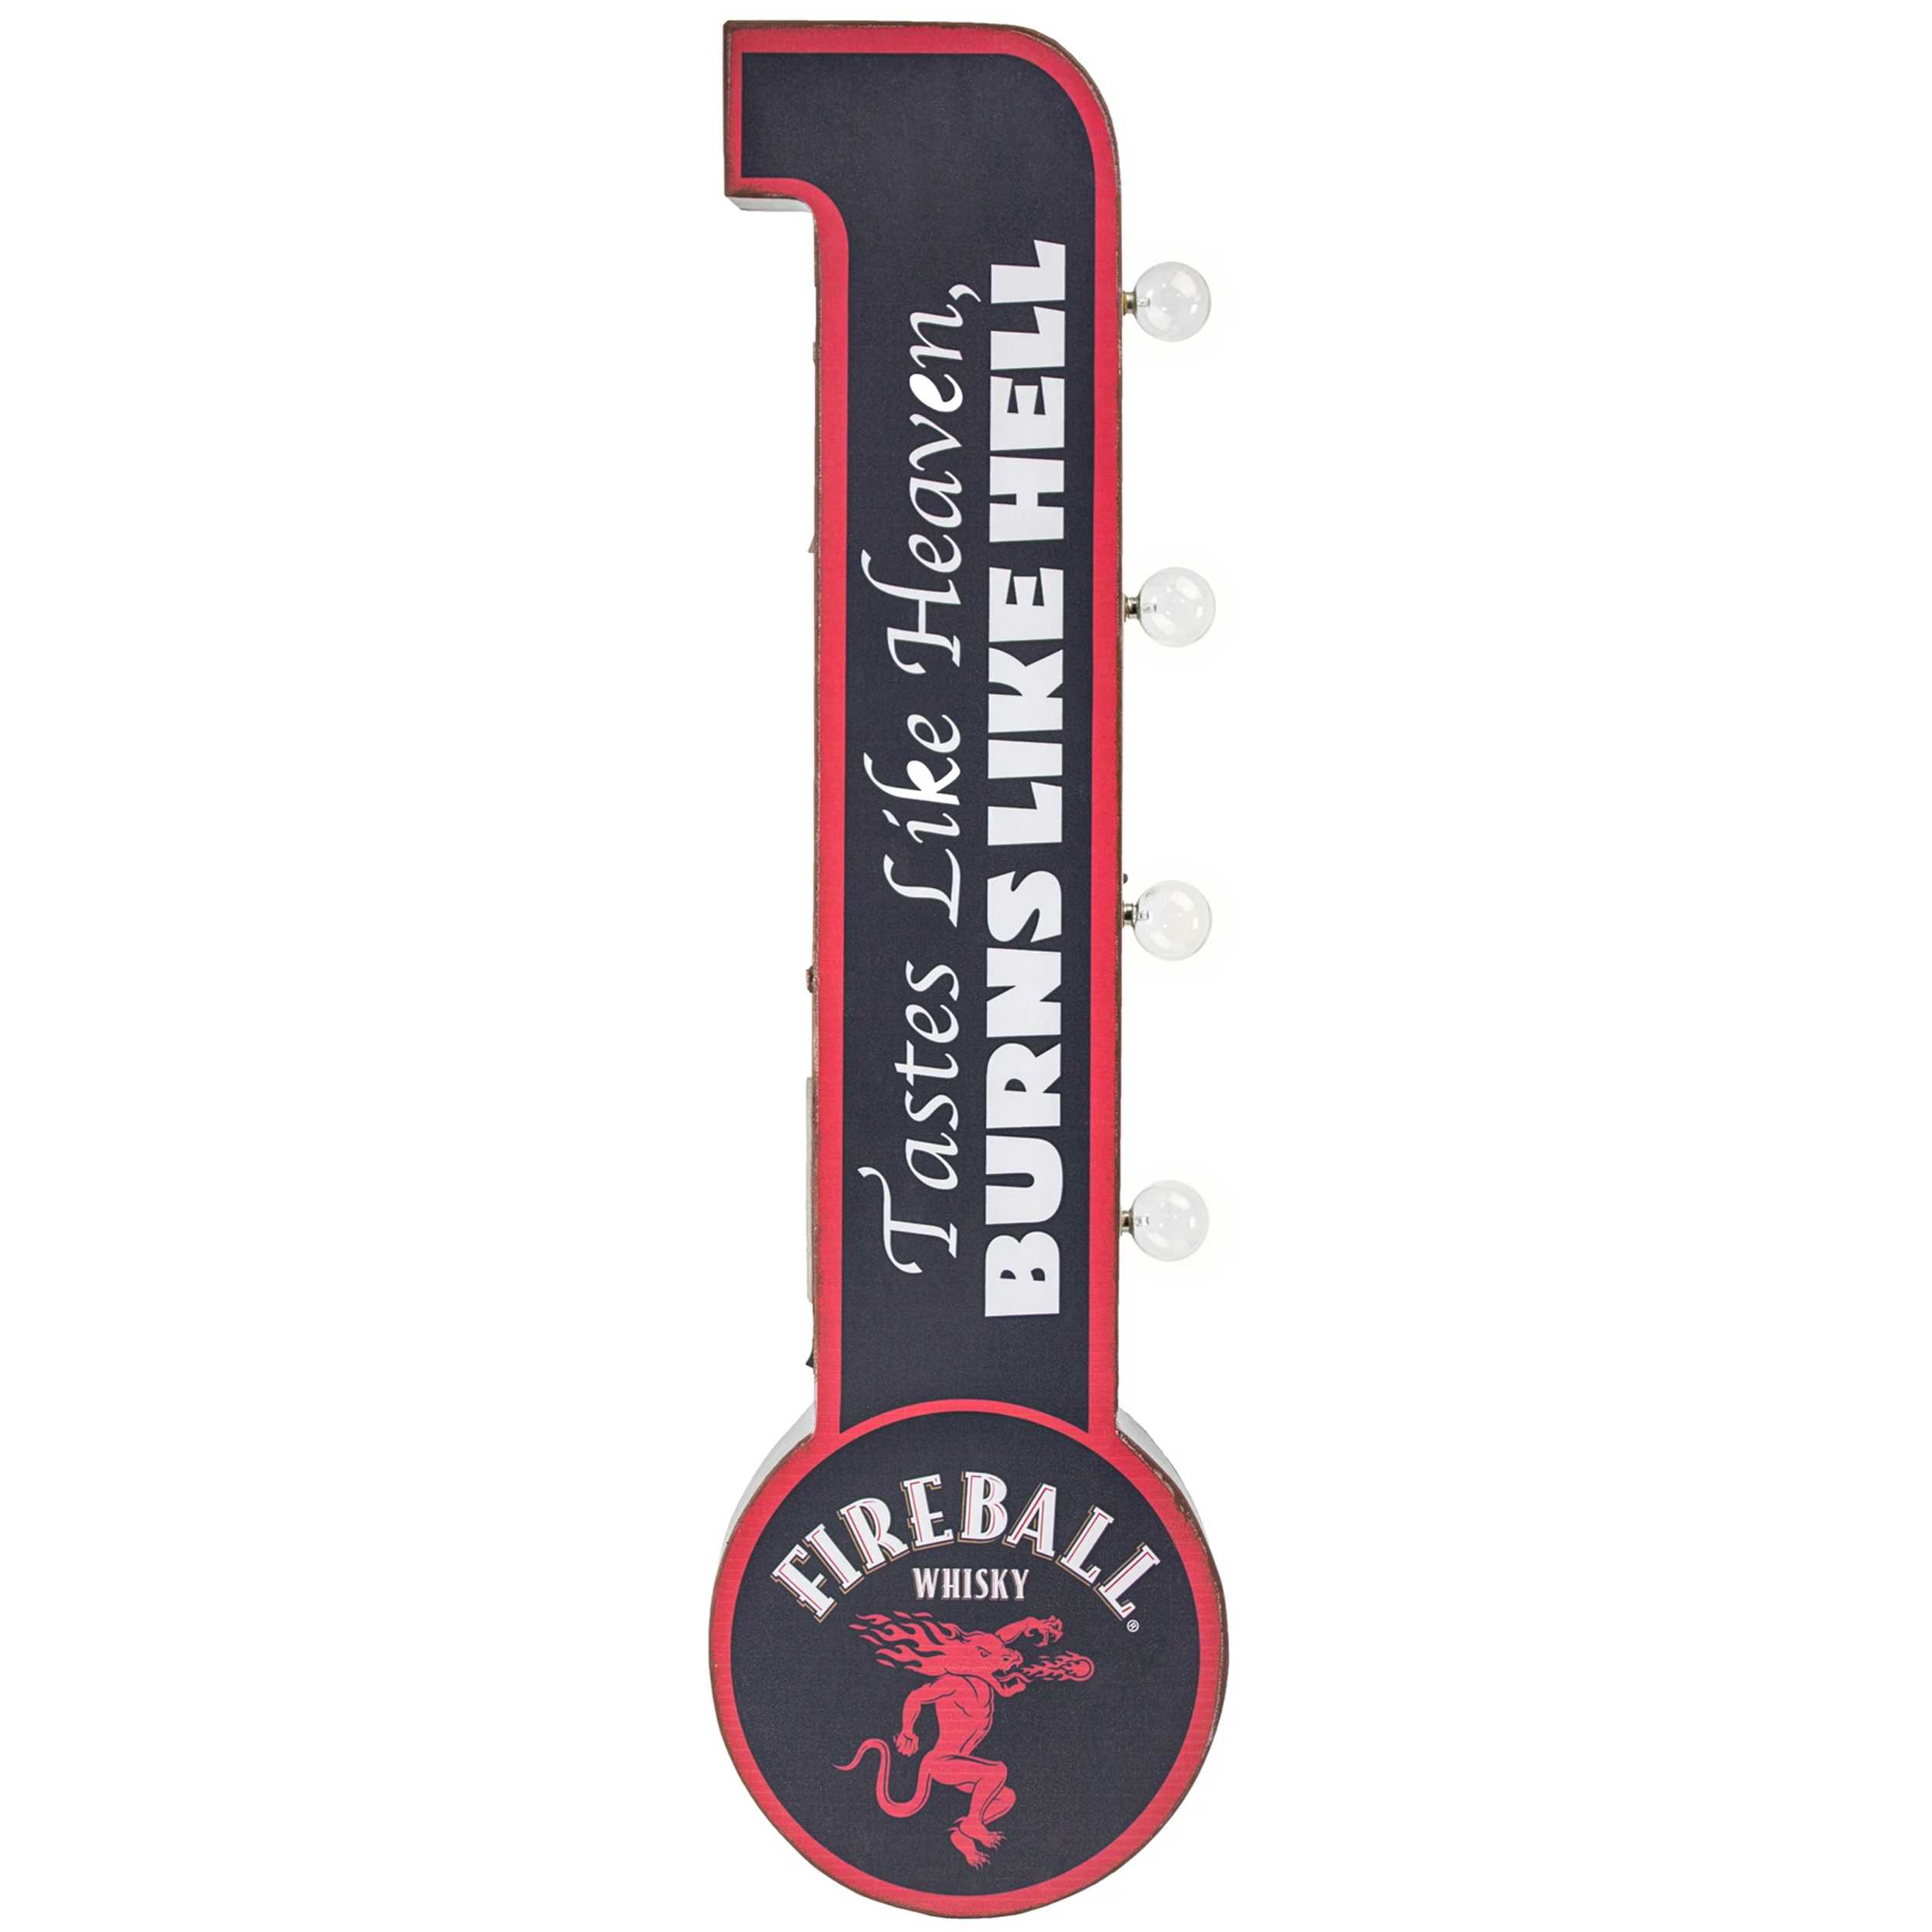 Vintage Two Sided Led Sign - Fireball Whisky